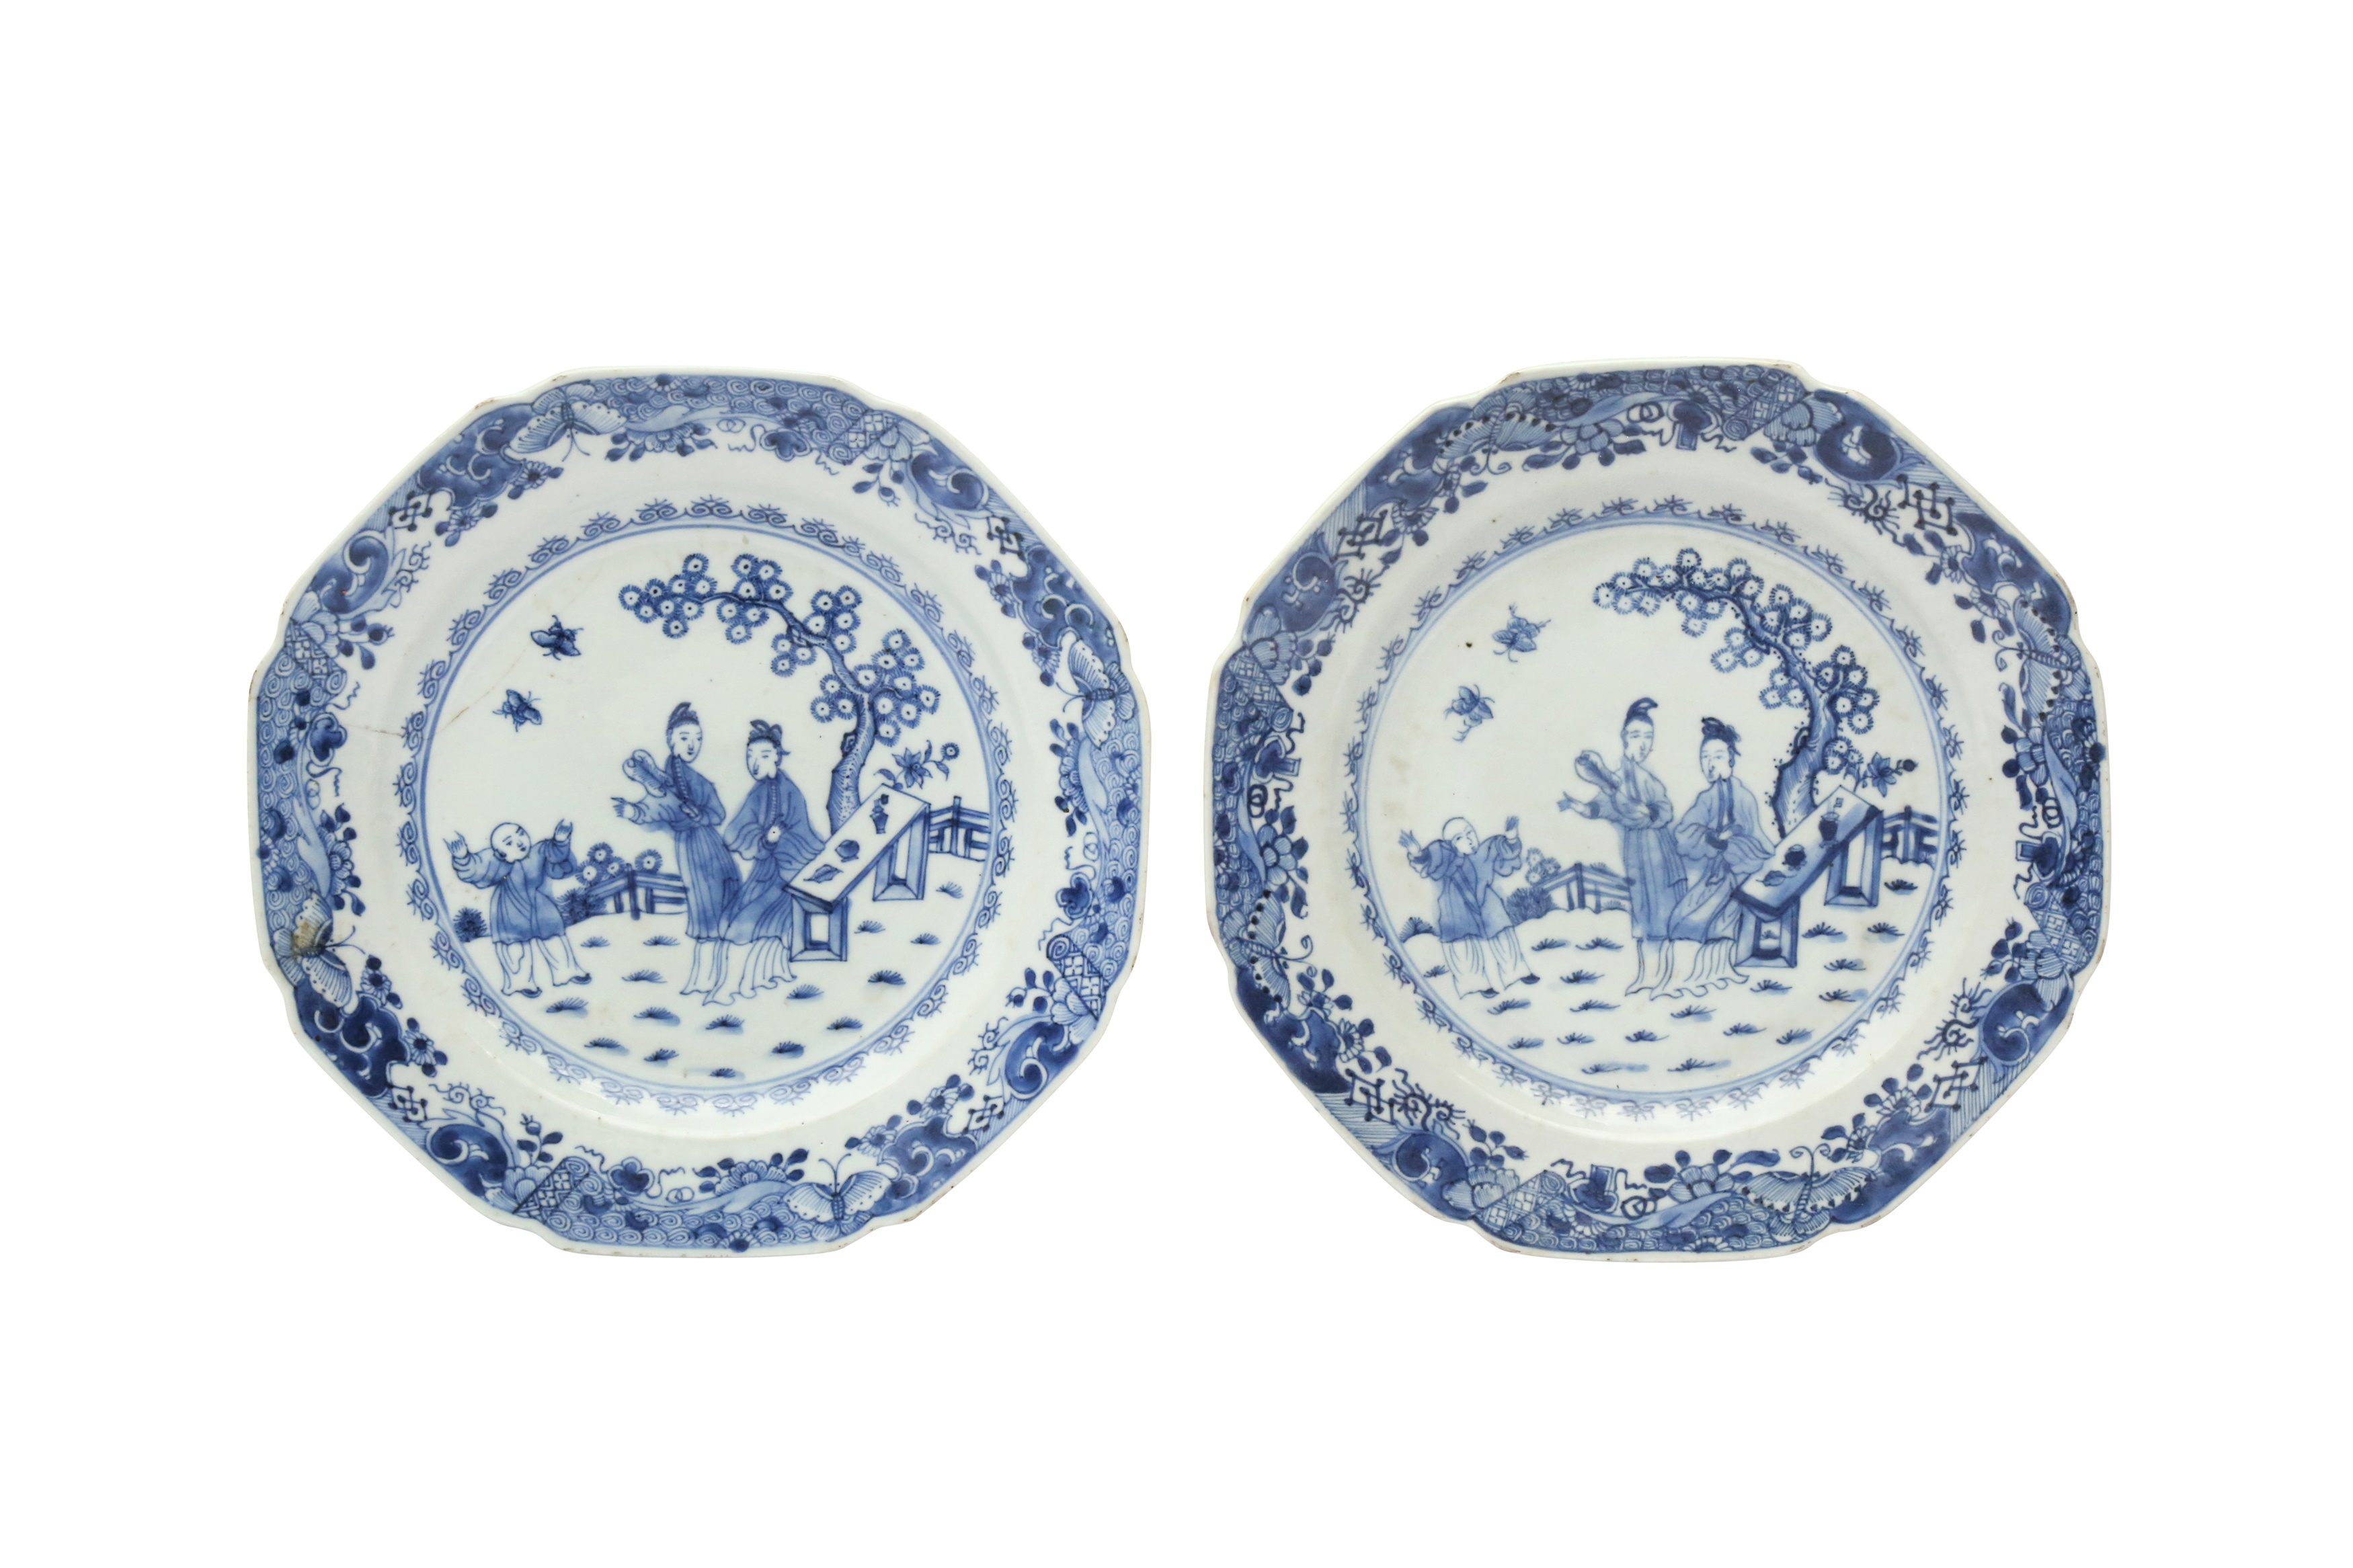 TWO CHINESE EXPORT BLUE AND WHITE DISHES 清十八世紀 外銷青花人物故事圖紋盤兩件